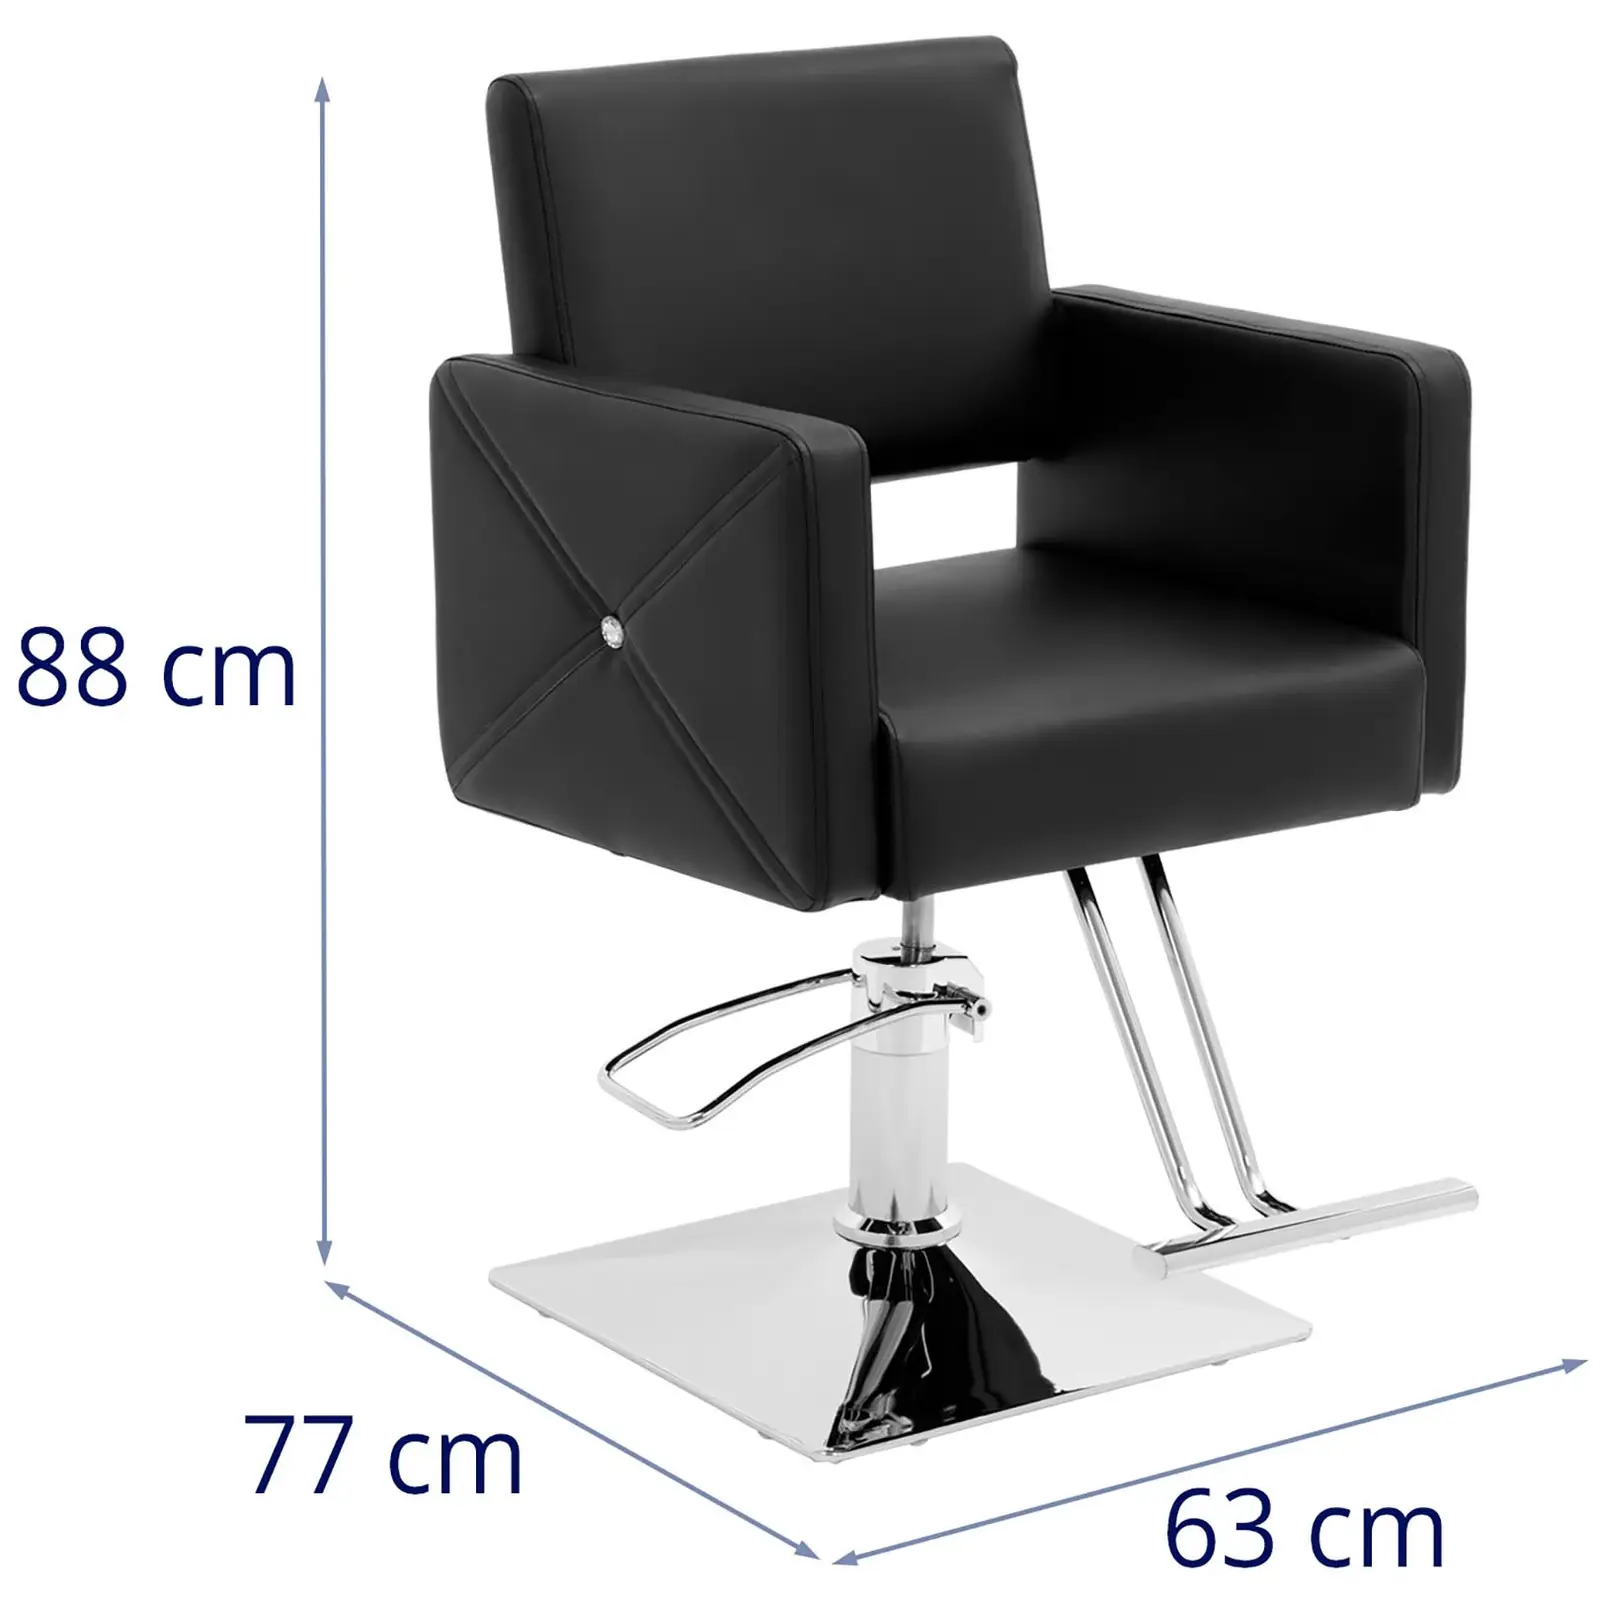 Carlisle Salon Chair with Footrest - seat height 45 - 55 cm - 150 kg - black